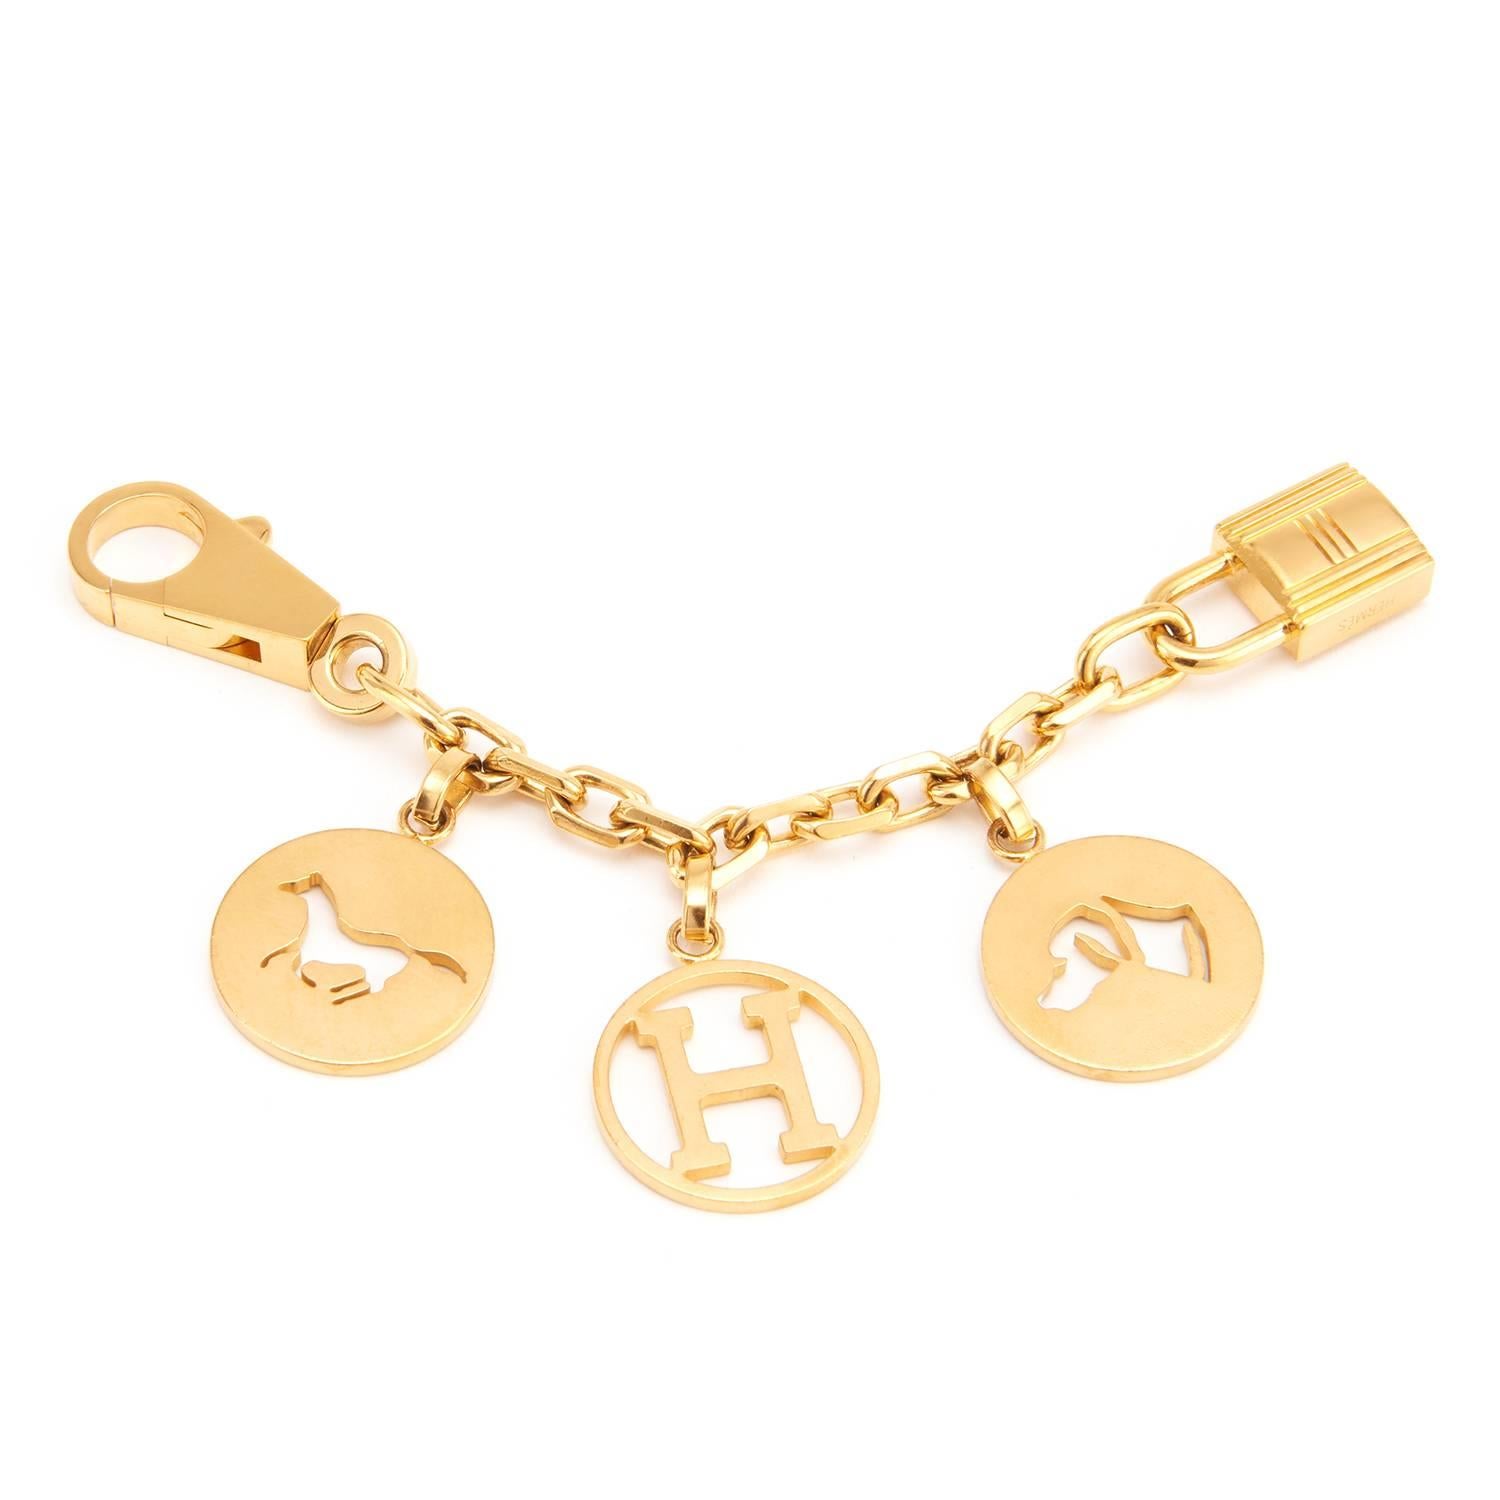 Hermes Breloque Charm Gold GHW Bag Charm for Birkin or Kelly  
Extremely rare item.
A most adorable Hermes bag charm in desirable GOLD for your Birkin or Kelly. 
Featuring the iconic horse, dog, and H charms on a chain, the Breloque Charm is one of